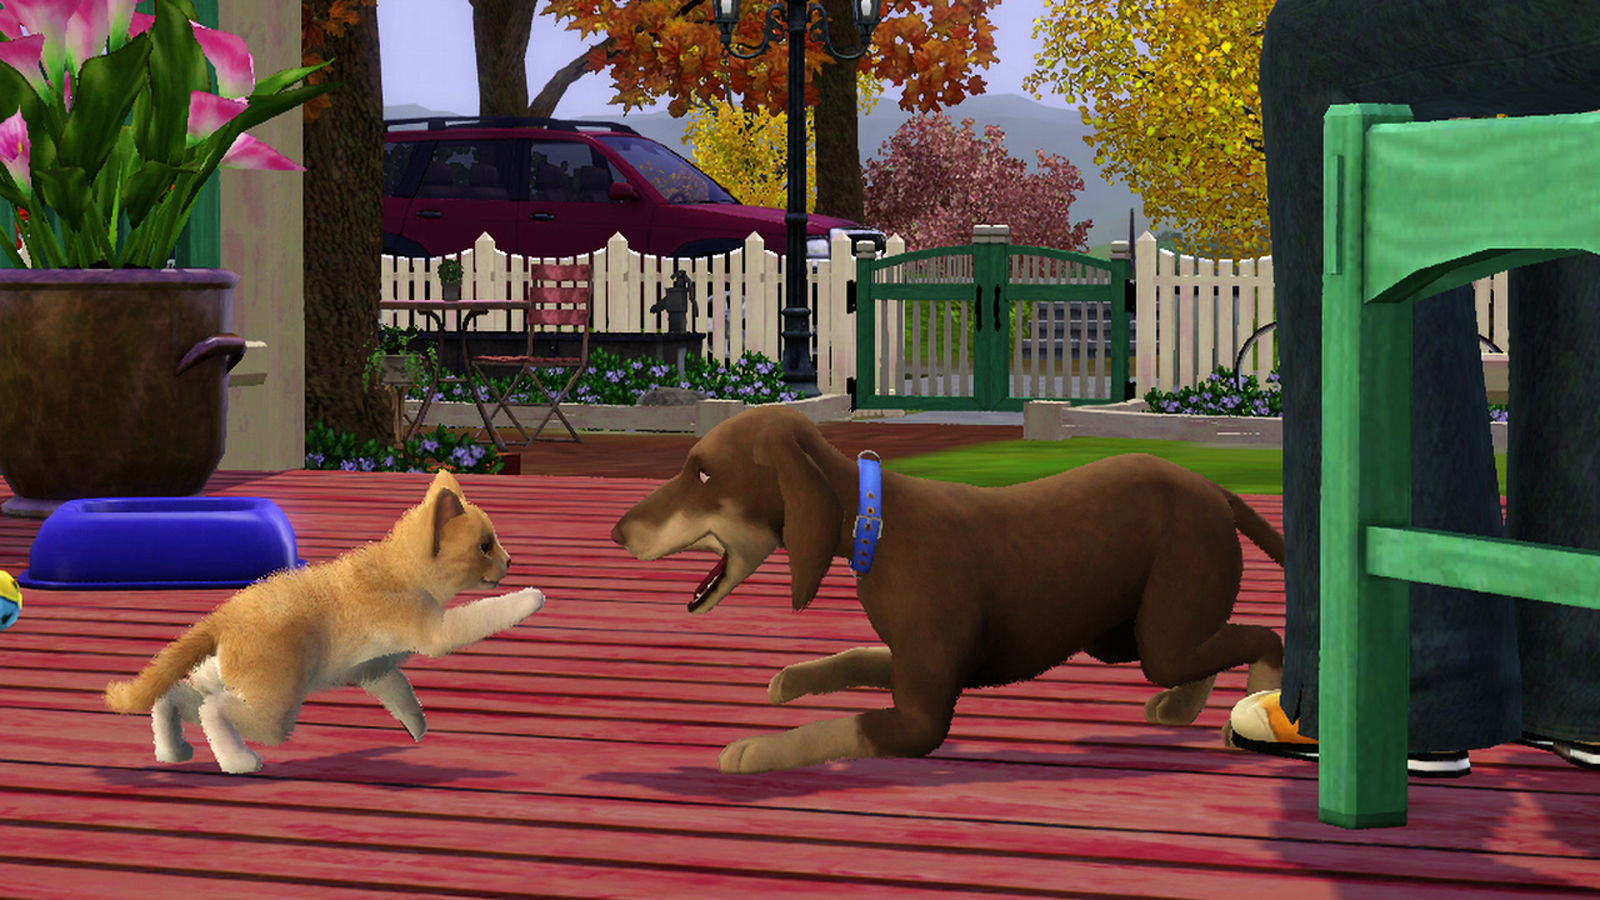 sims 3 cats and dogs